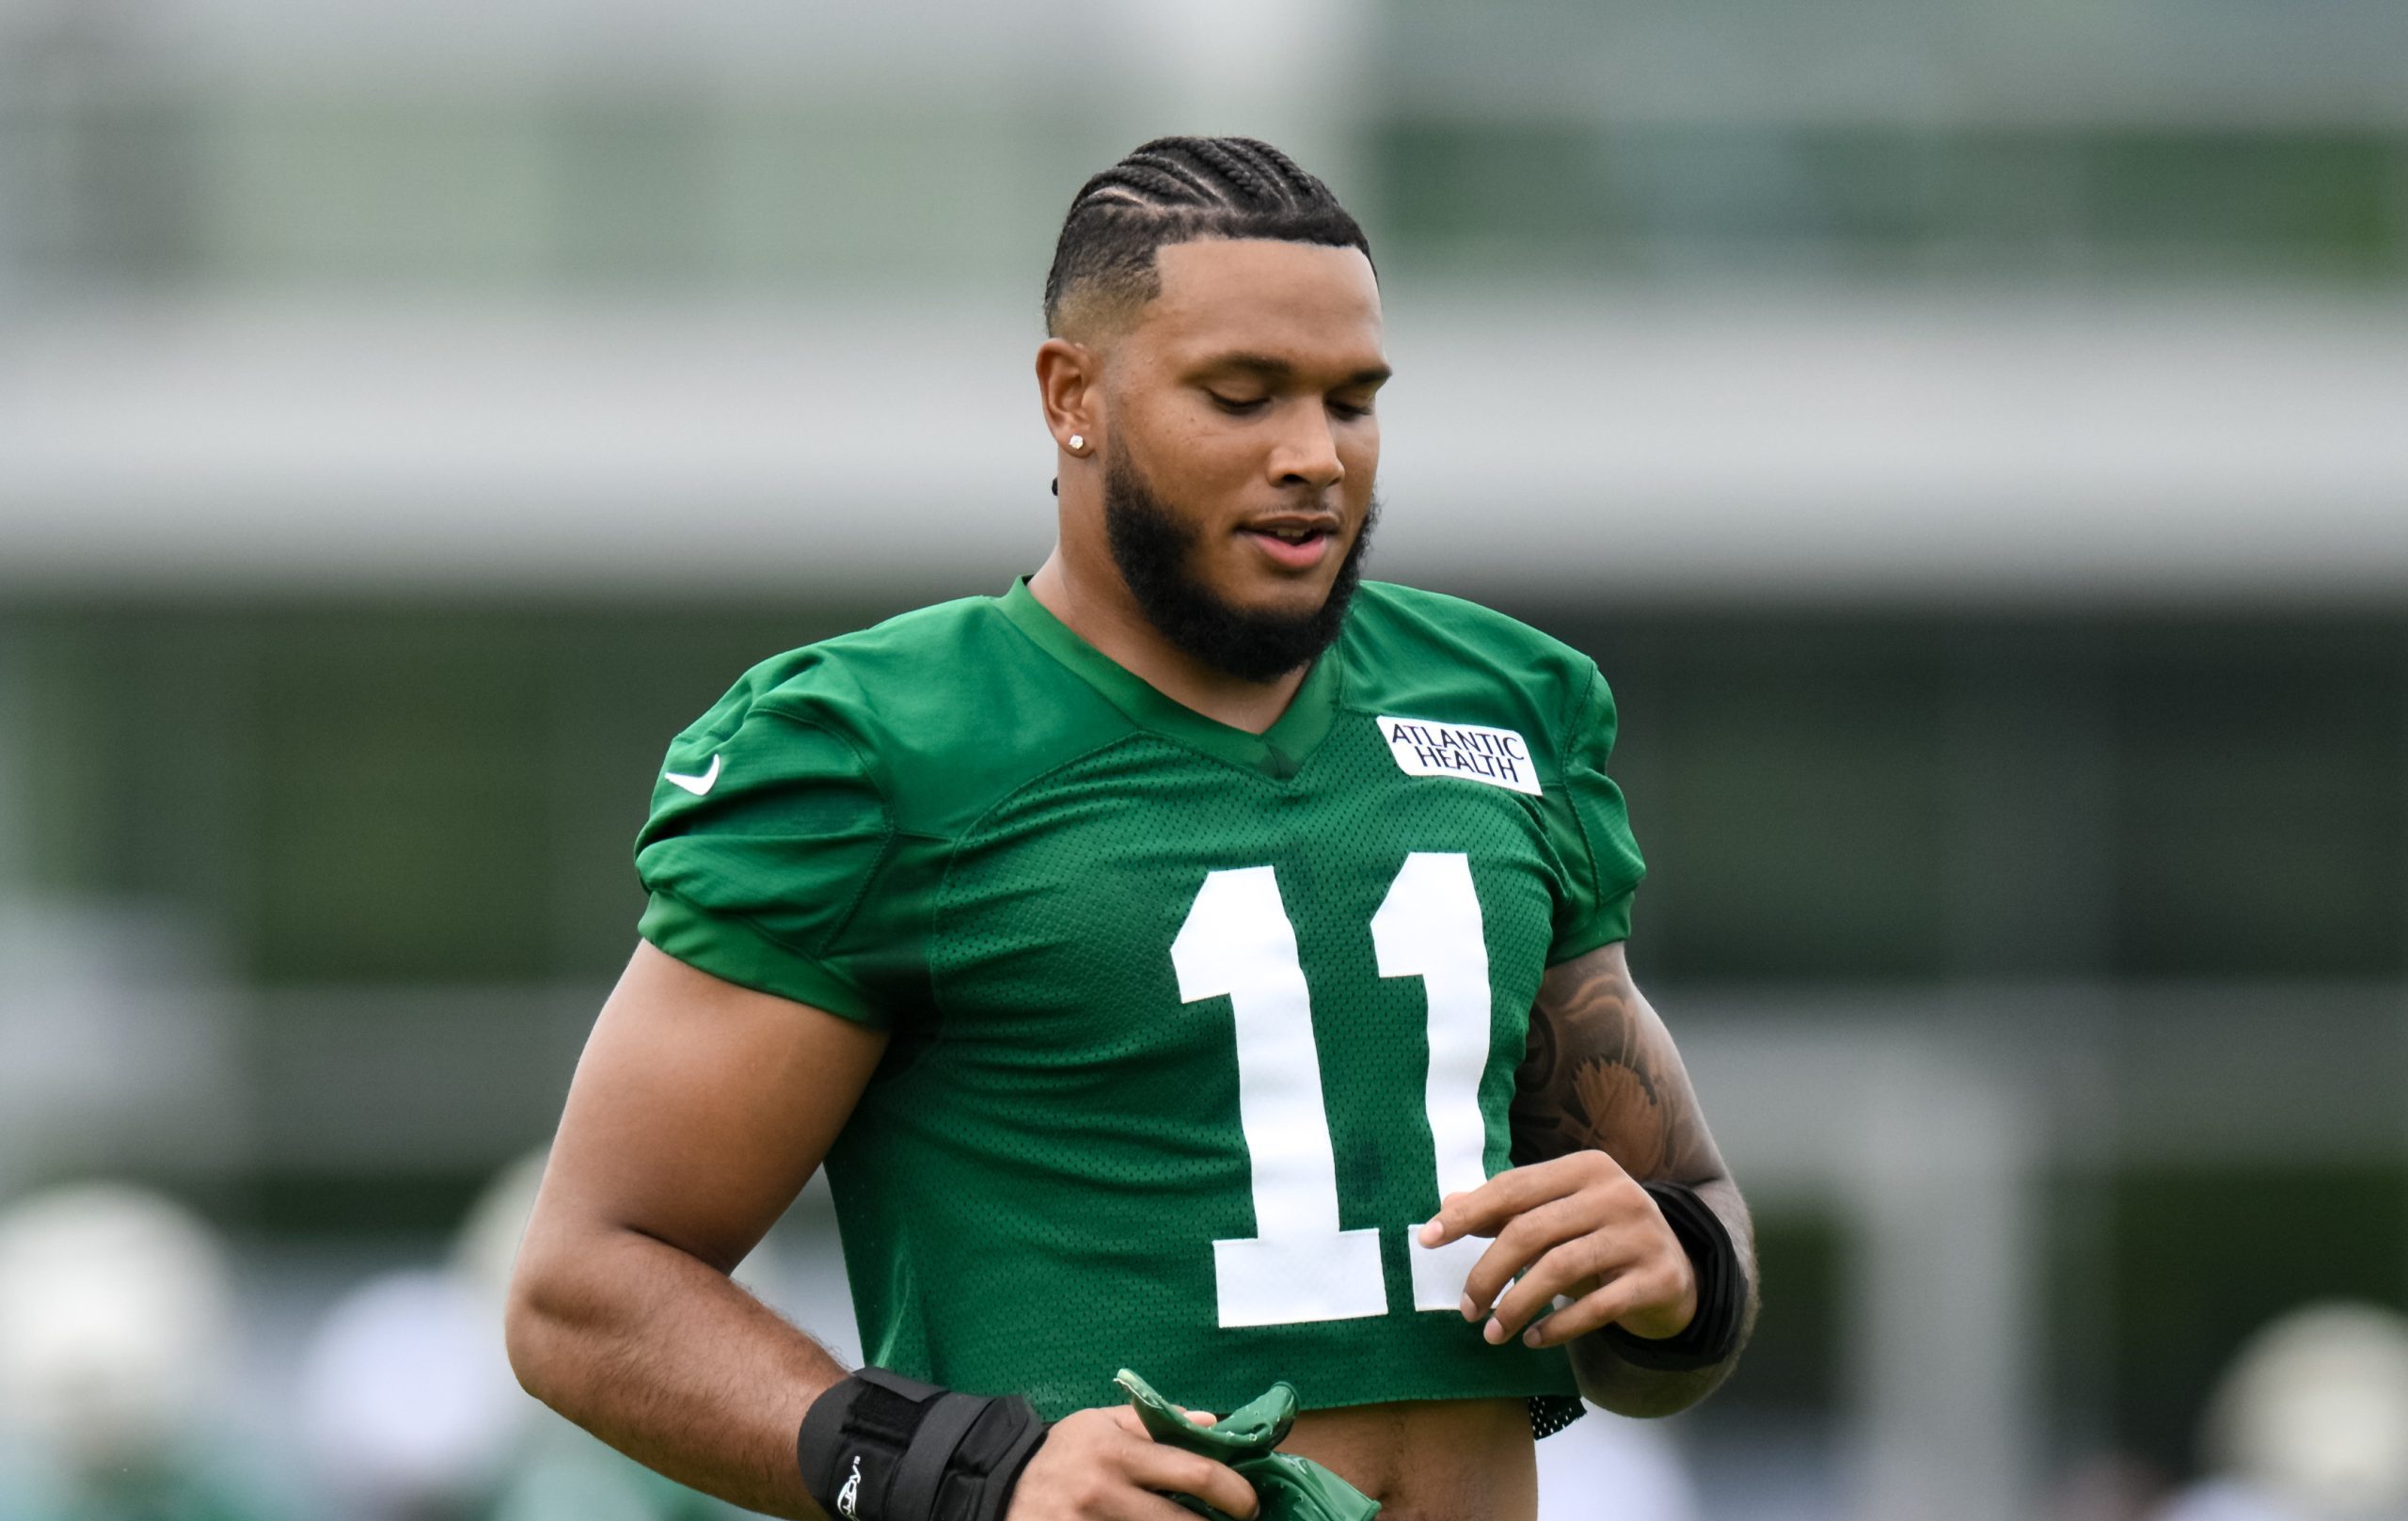 Jets Pro Bowler calls out team reporter for ‘lazy writing or just blatant lying’